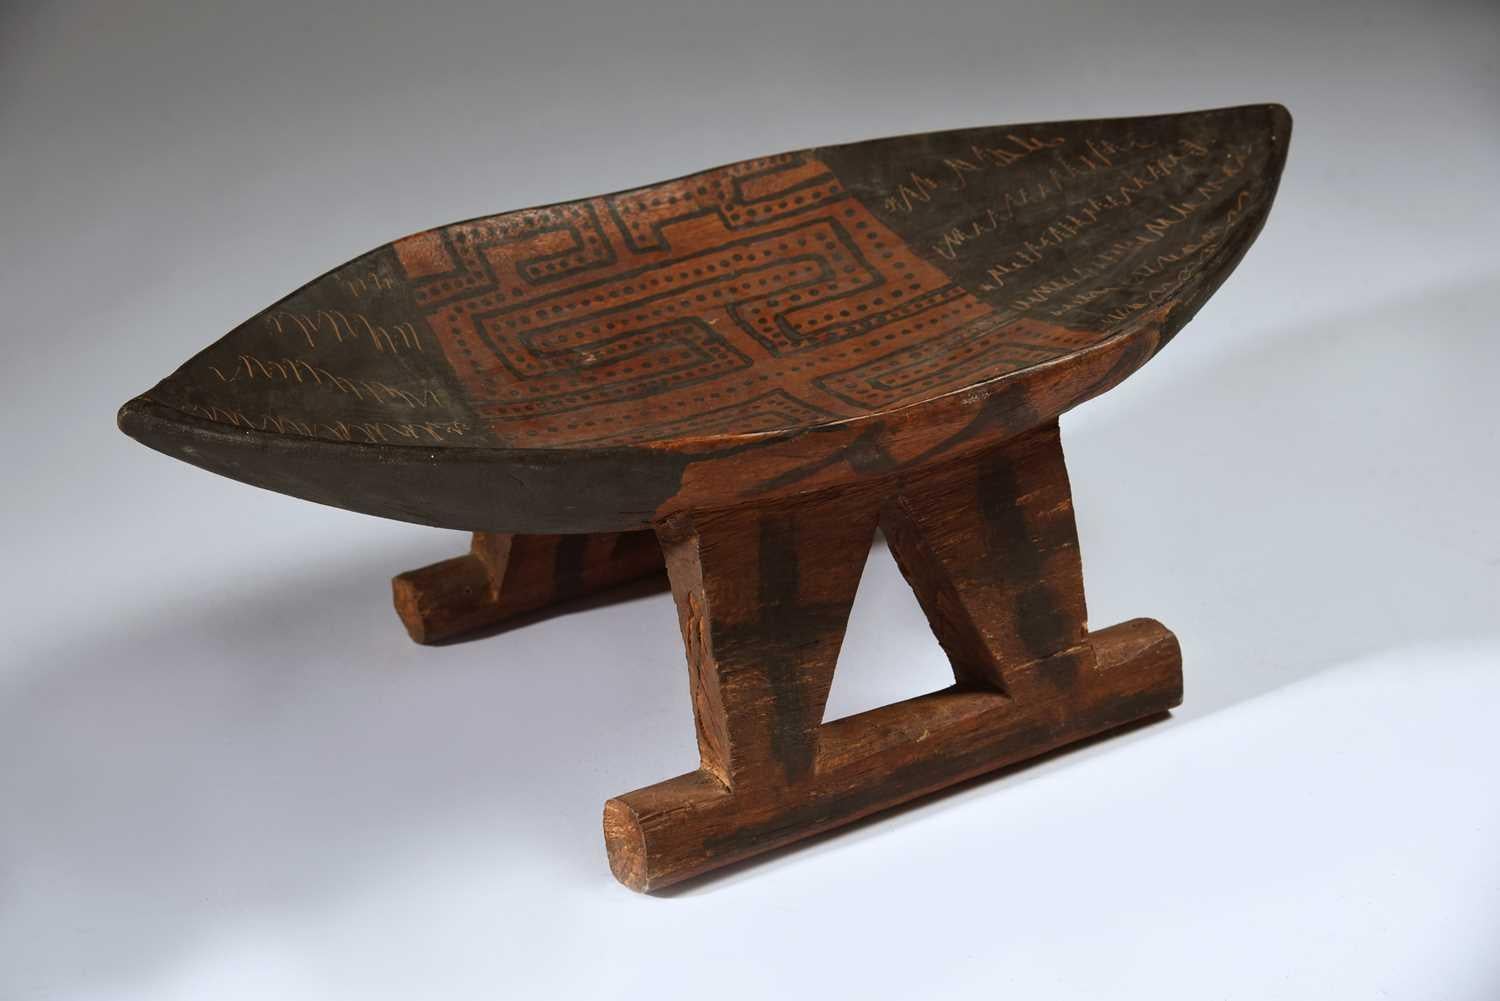 A fine Vintage carved pained Suriname stool with painted and scratched decoration, Tribal South Latin American Antiques
 
Suriname South America
 Measures: 21 cm height, 57 cm length
Condition: Fine
Ex missionary collection
Period early to